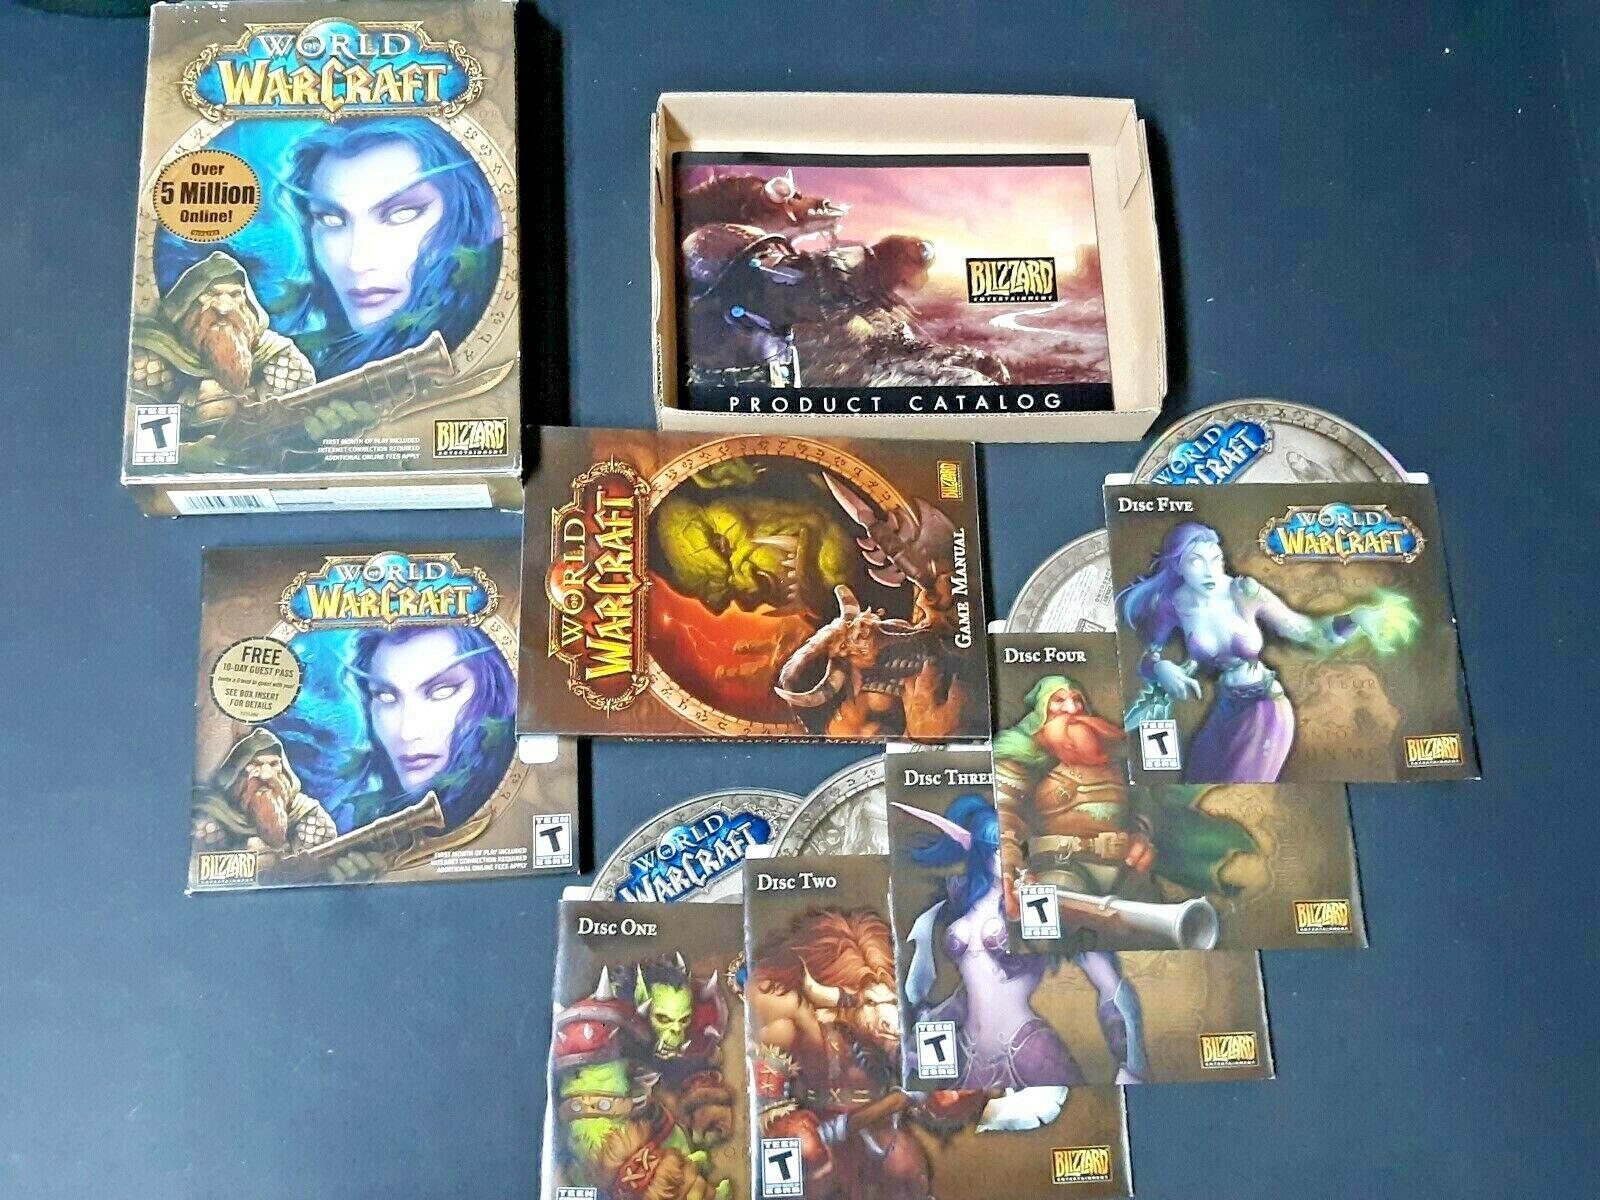 World of Warcraft for PC complete pre-owned